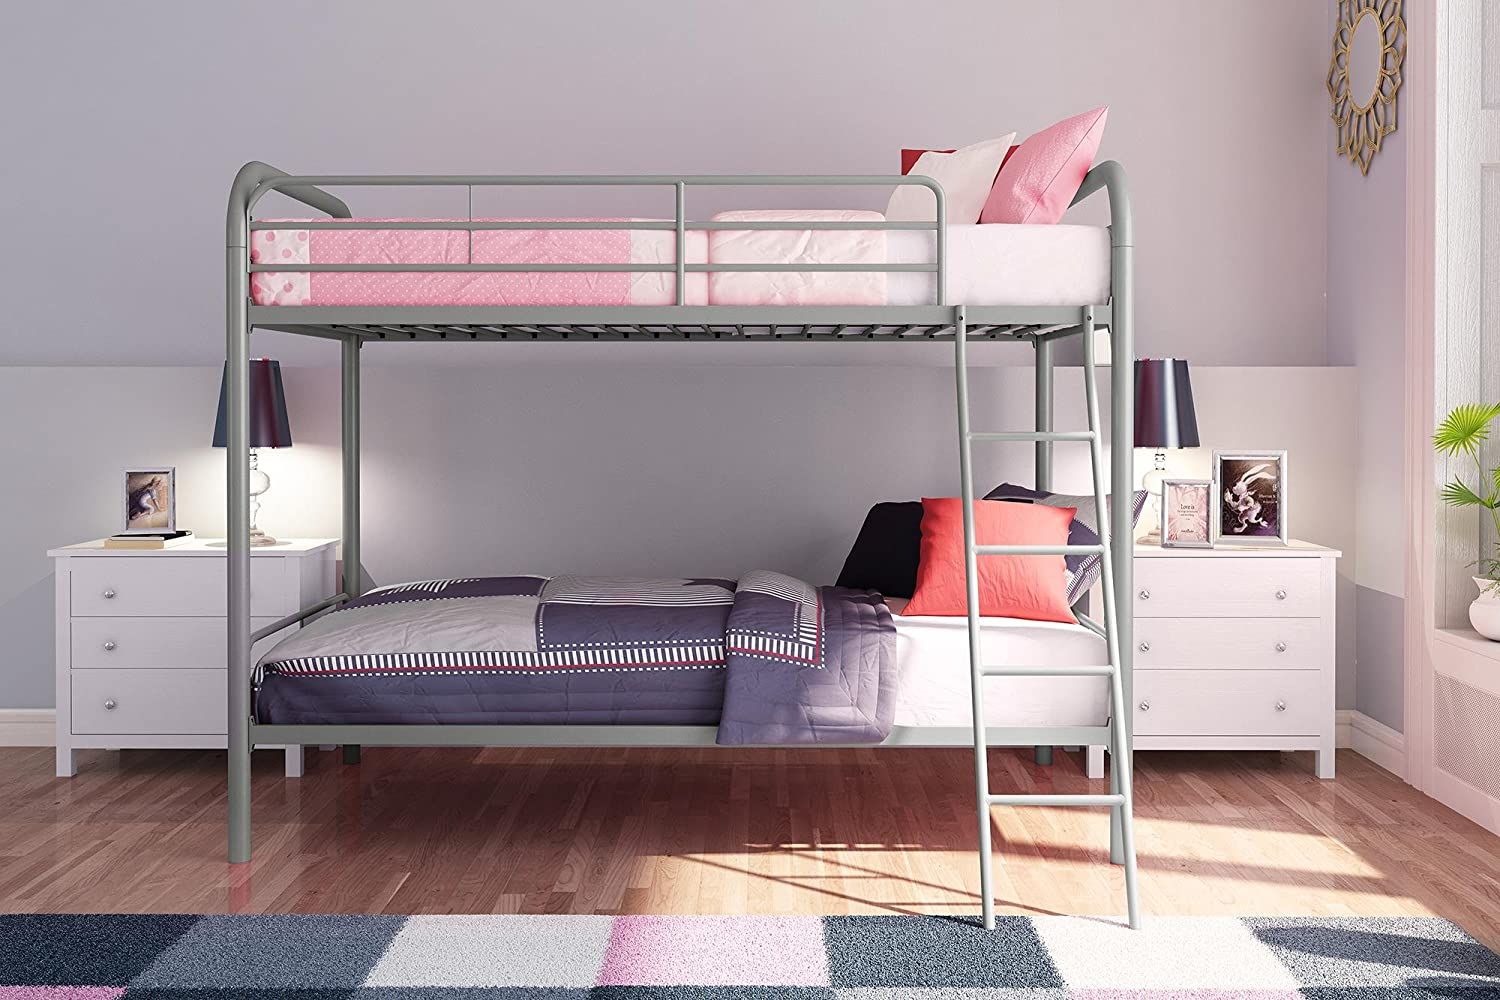 8 Best Bunk Beds 2020 The Strategist, Bunk Beds That Come Apart